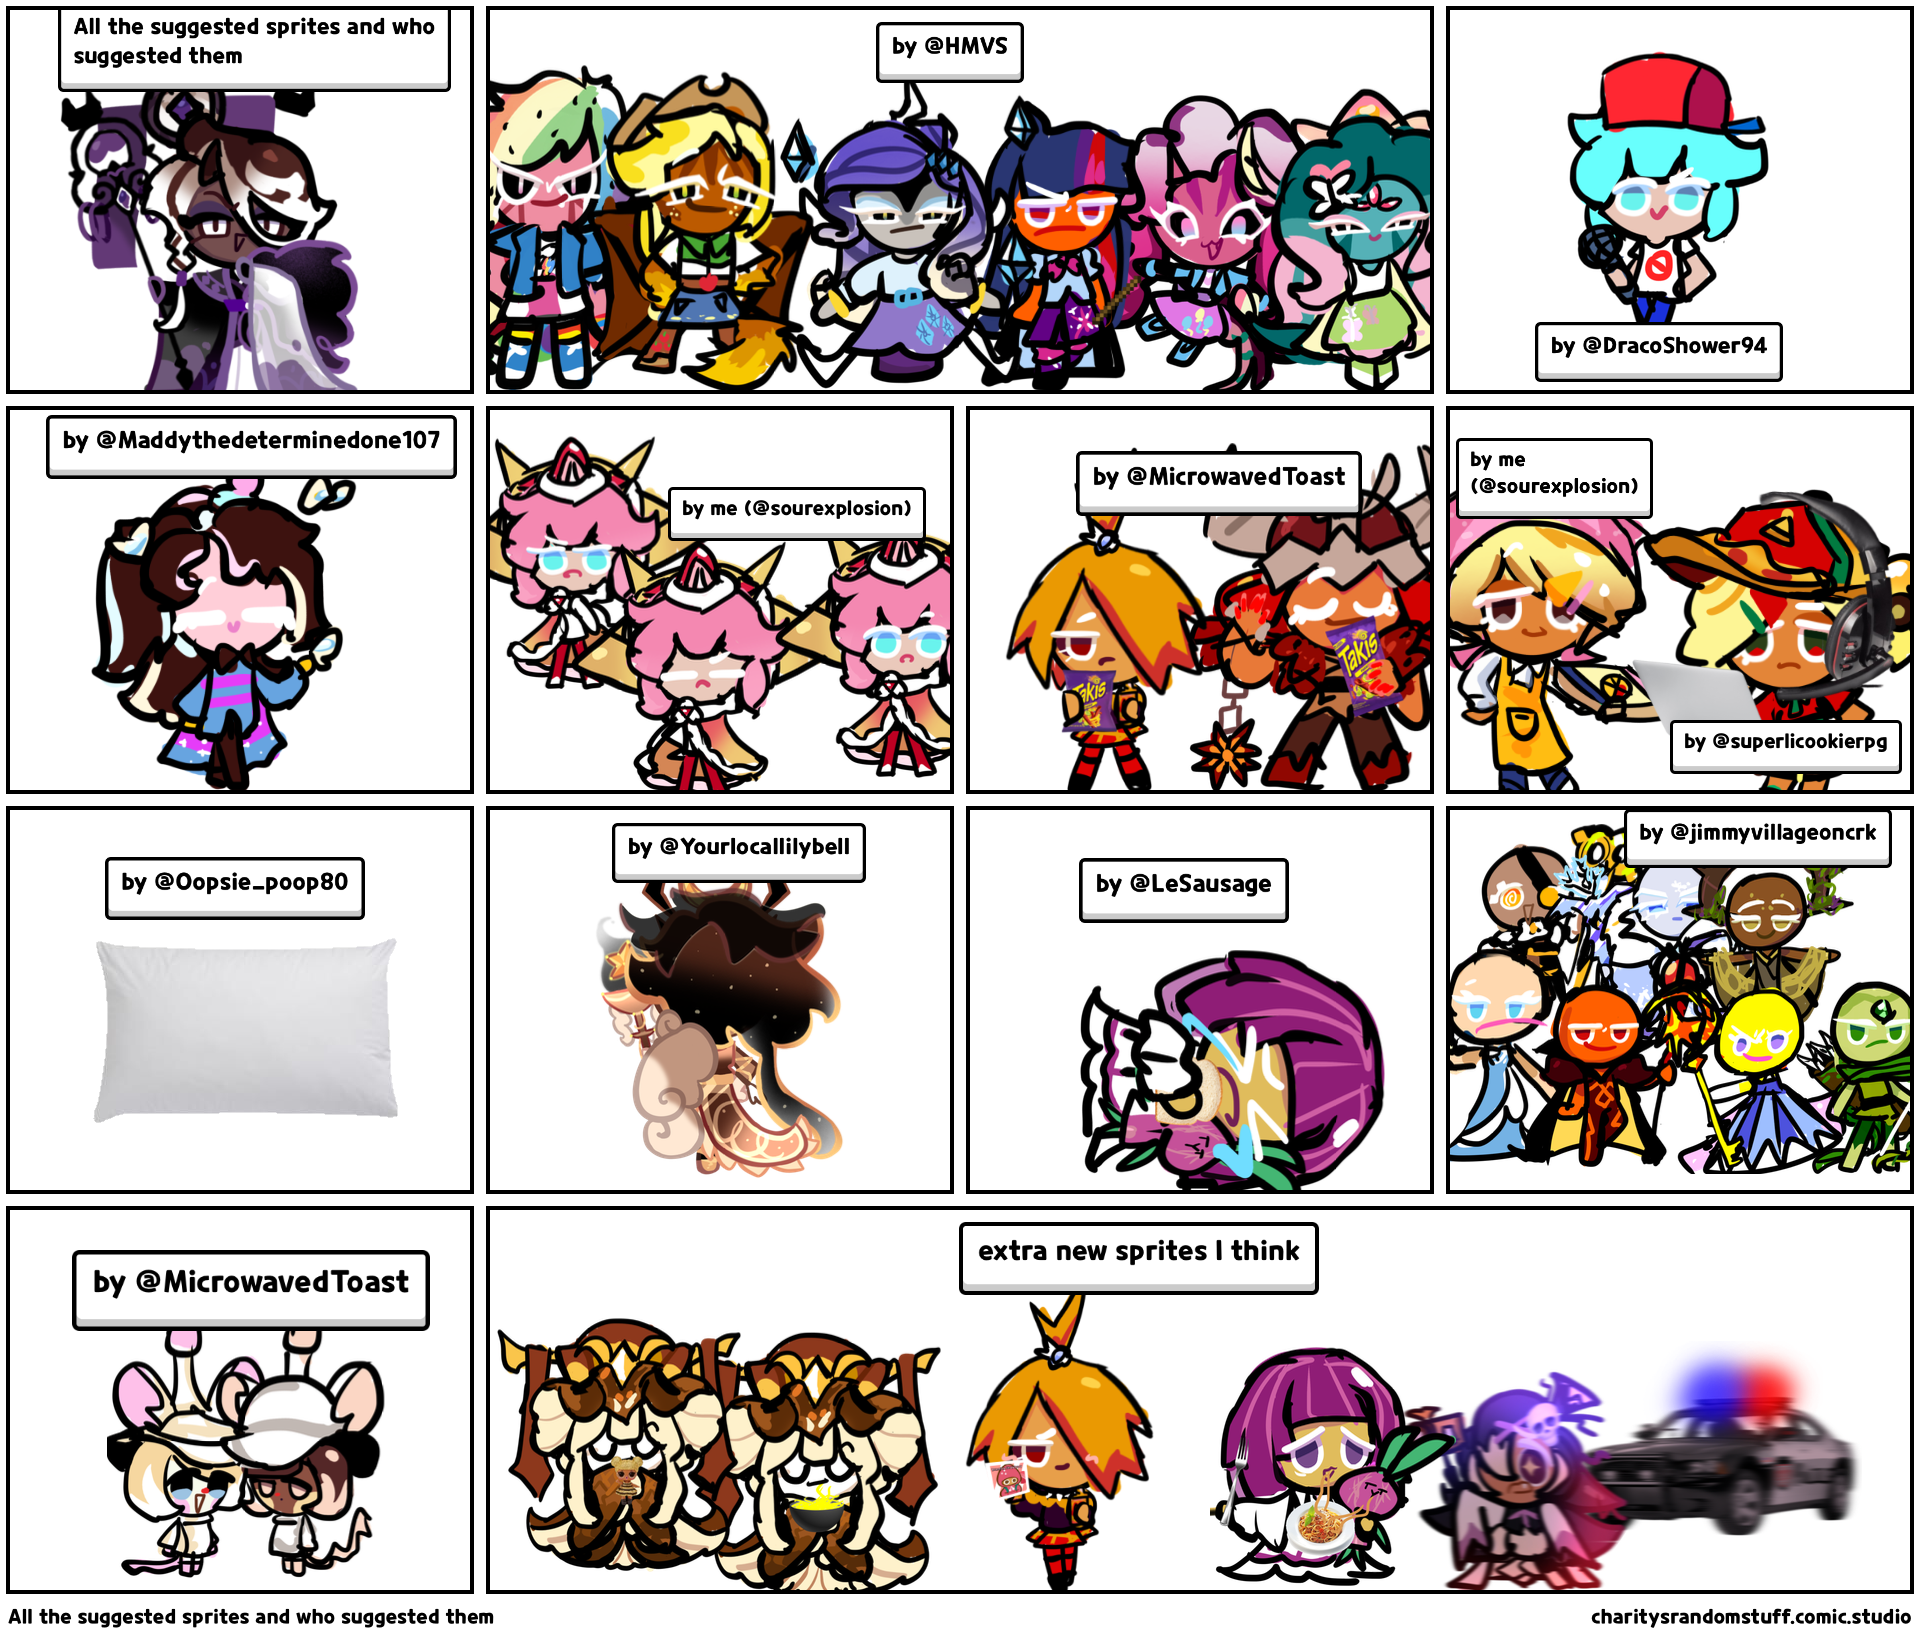 All the suggested sprites and who suggested them